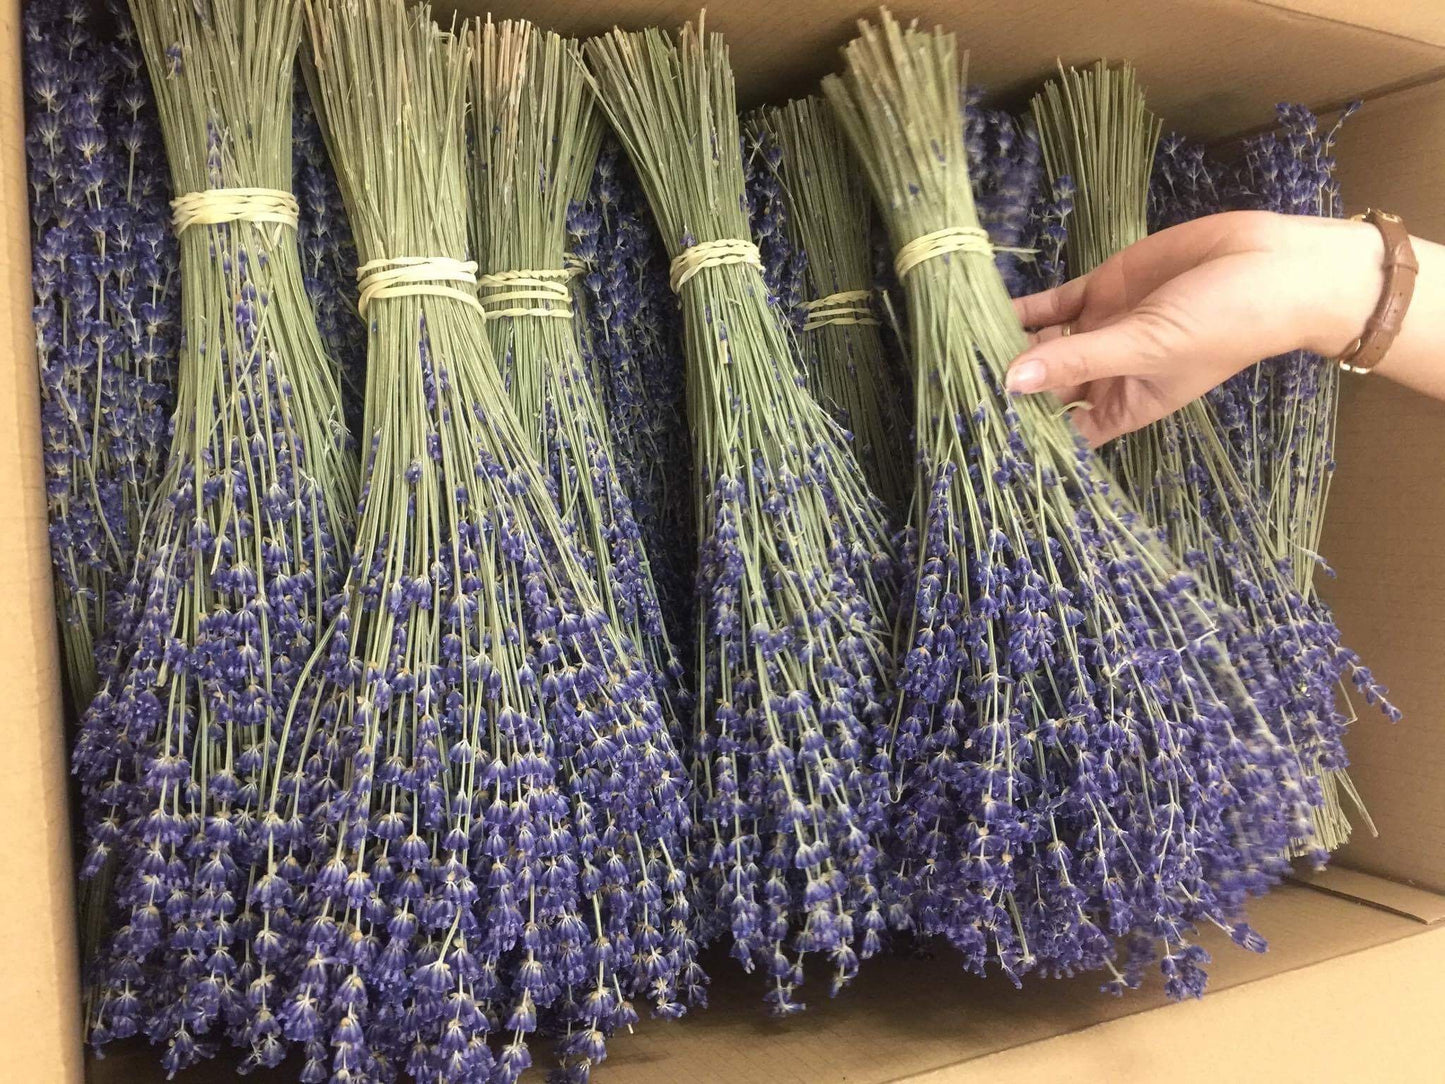 Wholesales Case of Provencial French true lavender, lavendula super blue from South of France